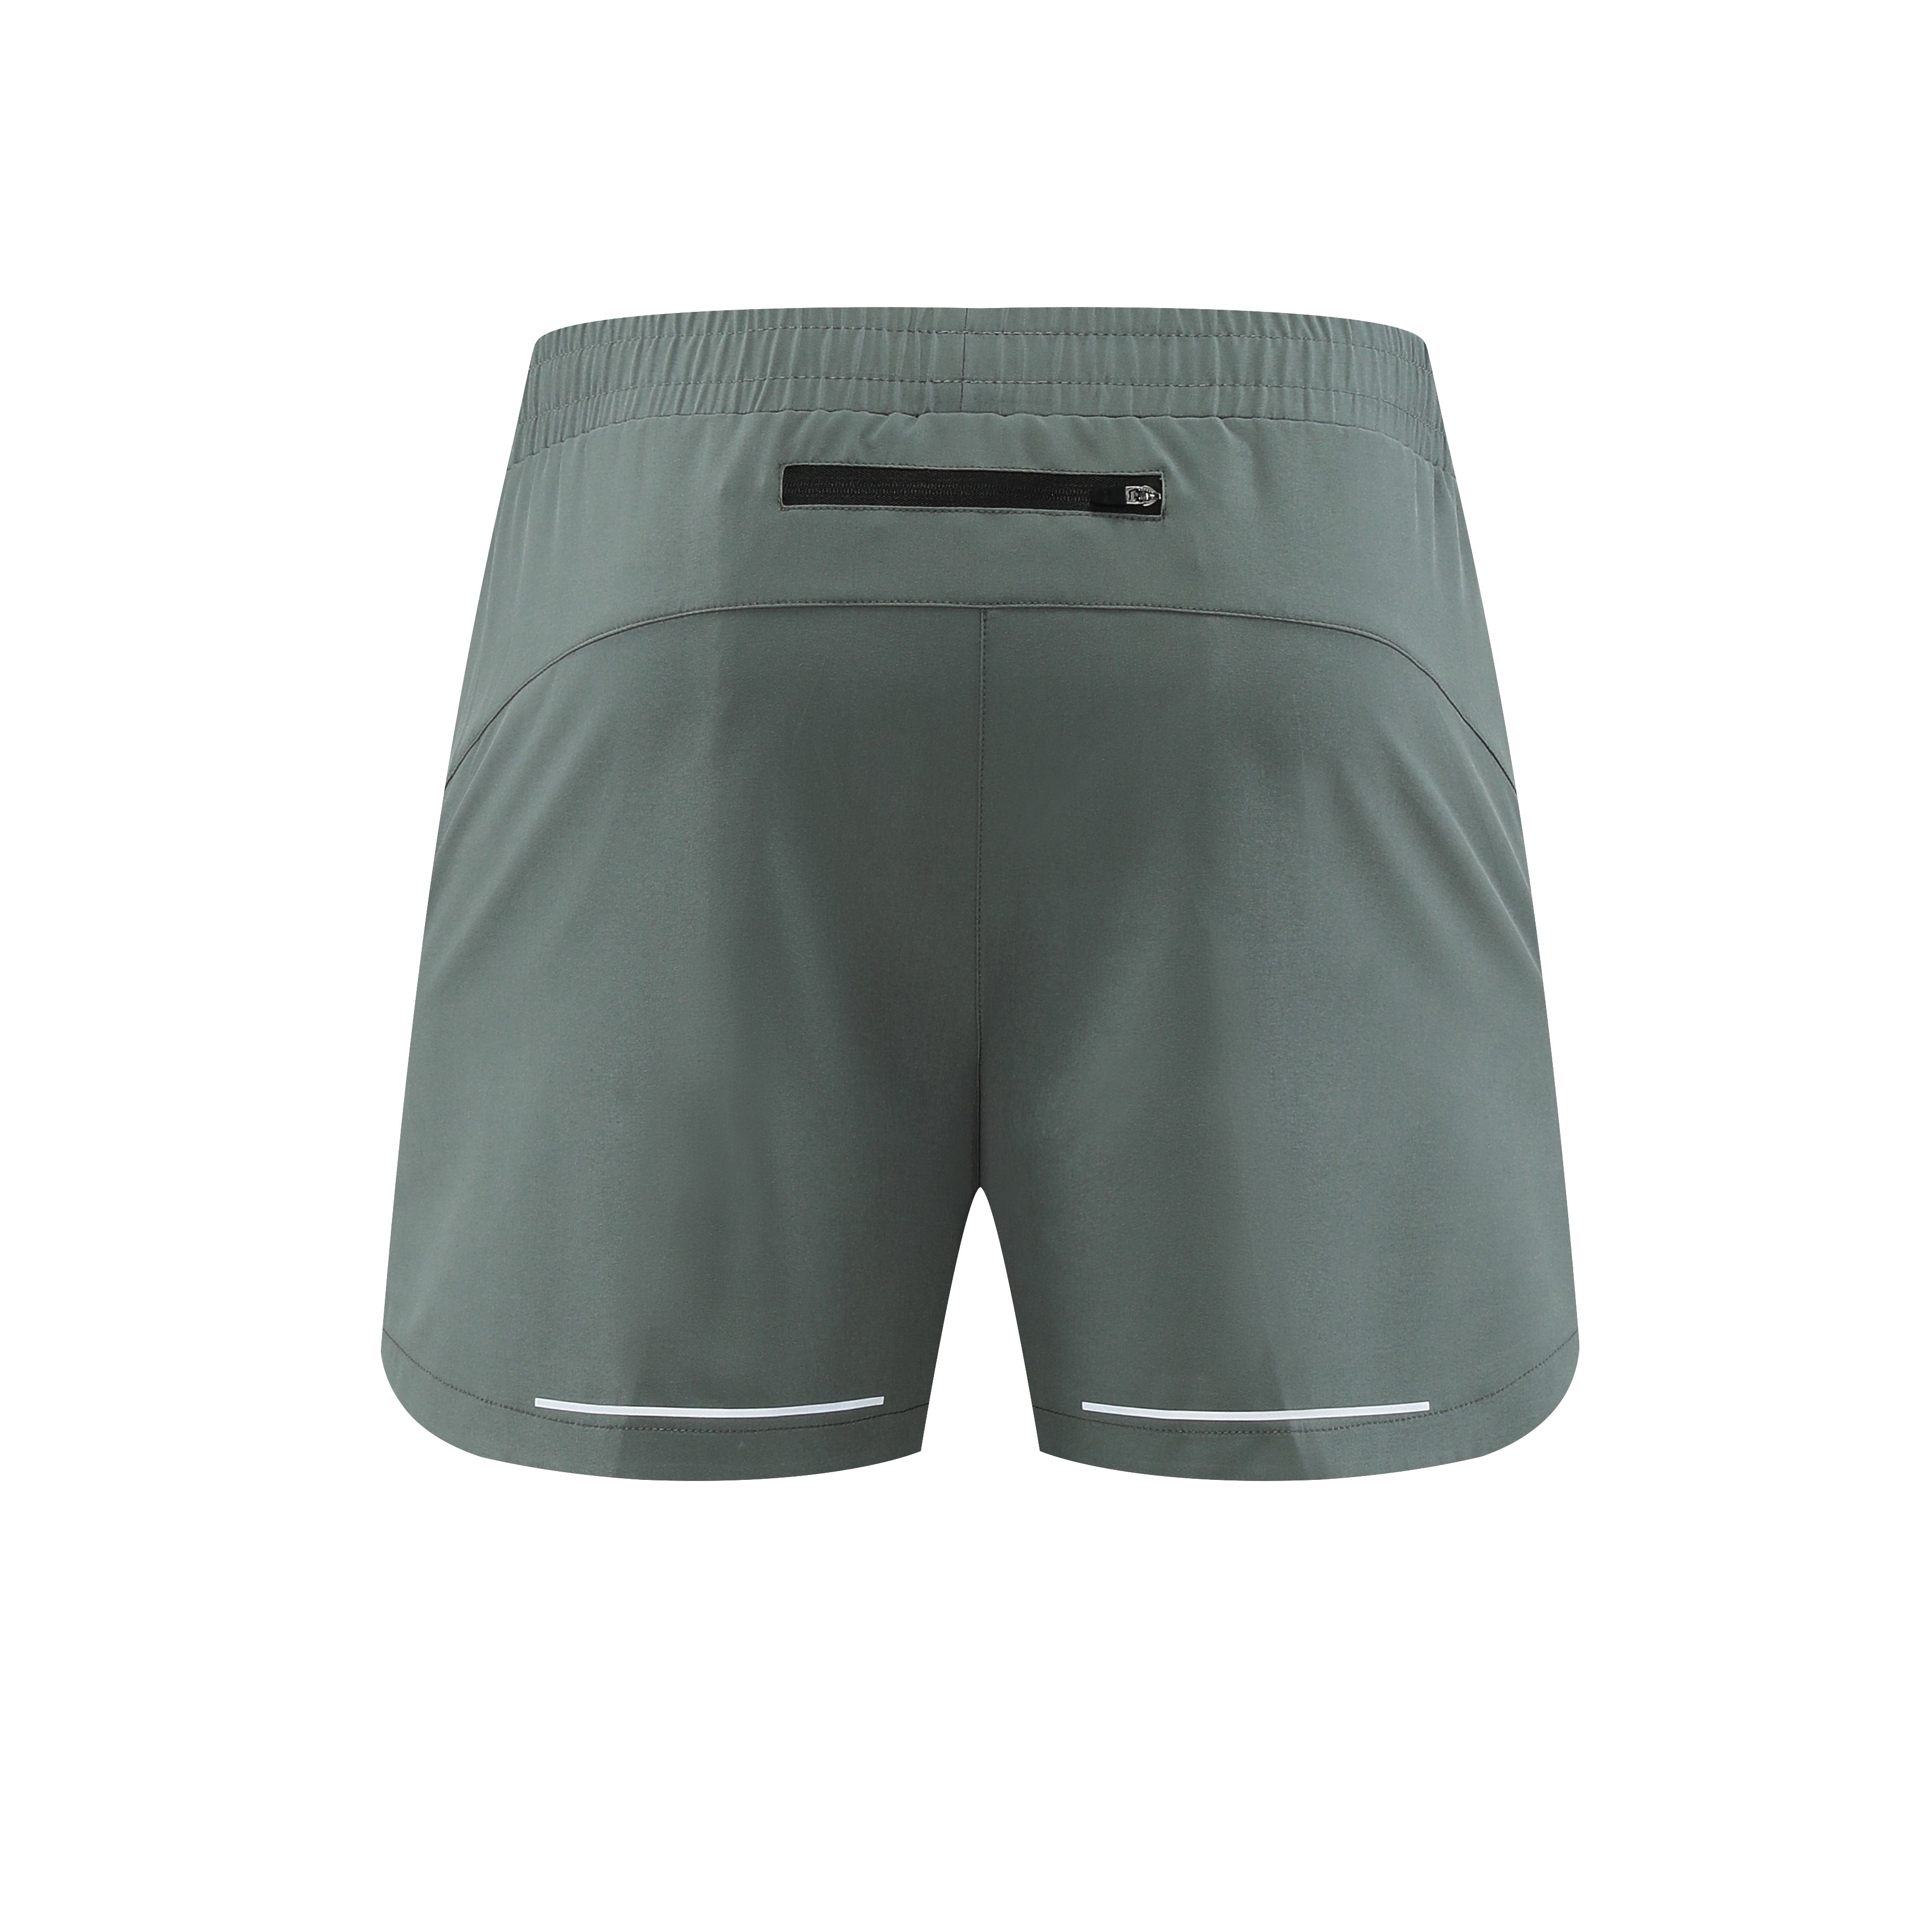 Men's Quick Drying Spartan Graphic Shorts